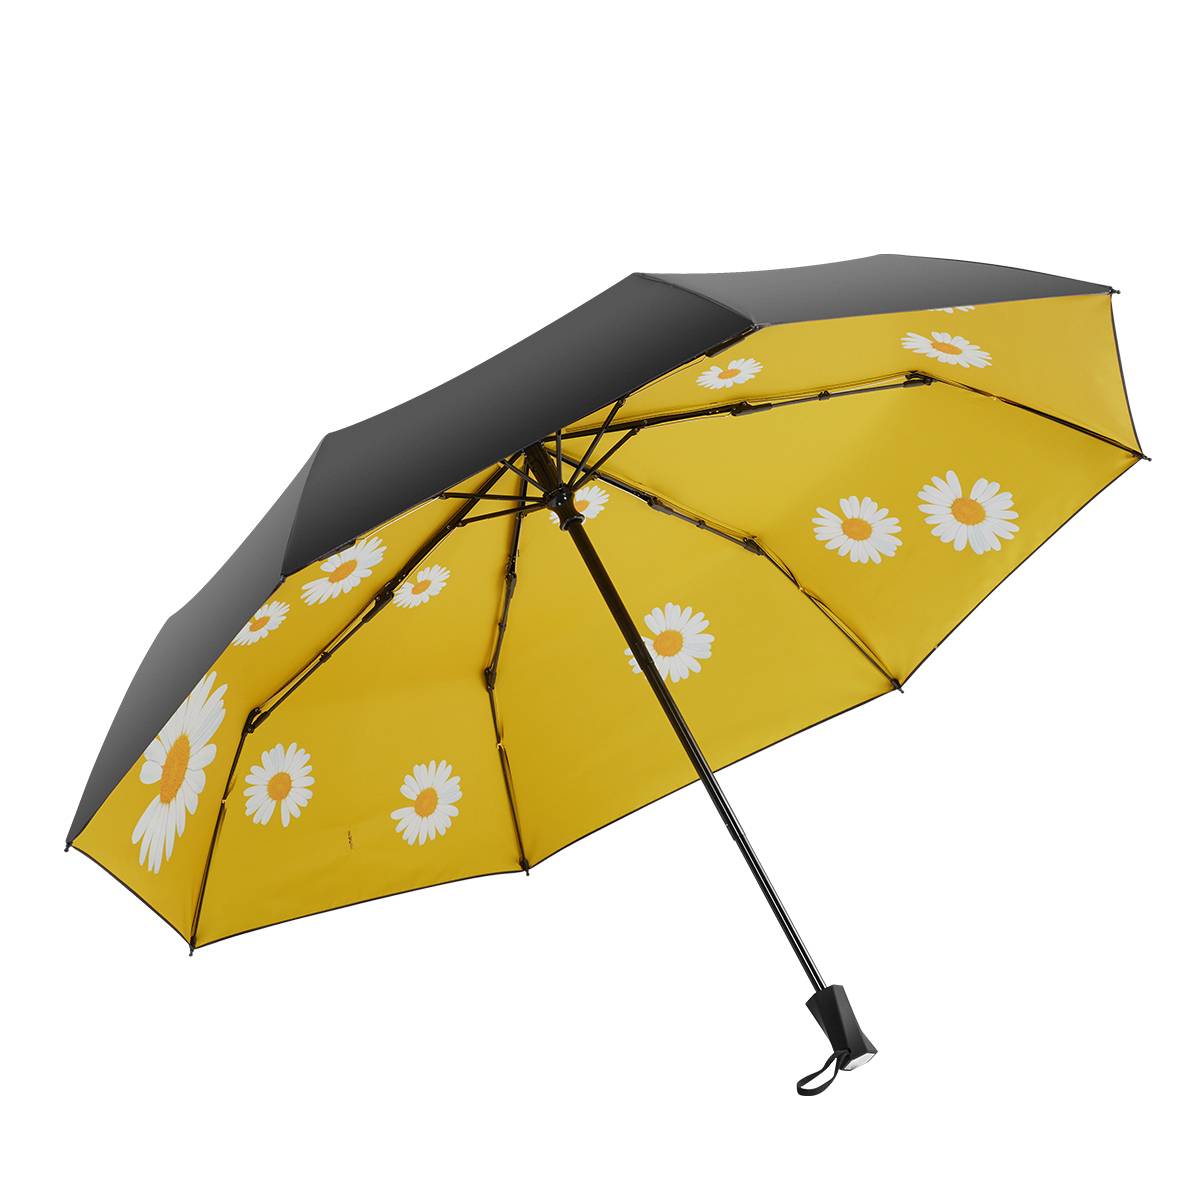 professional factory for Camo Umbrella - 21 inch 8 ribs manual open unique handle design with daisy flower 3 fold umbrella – DongFangZhanXin